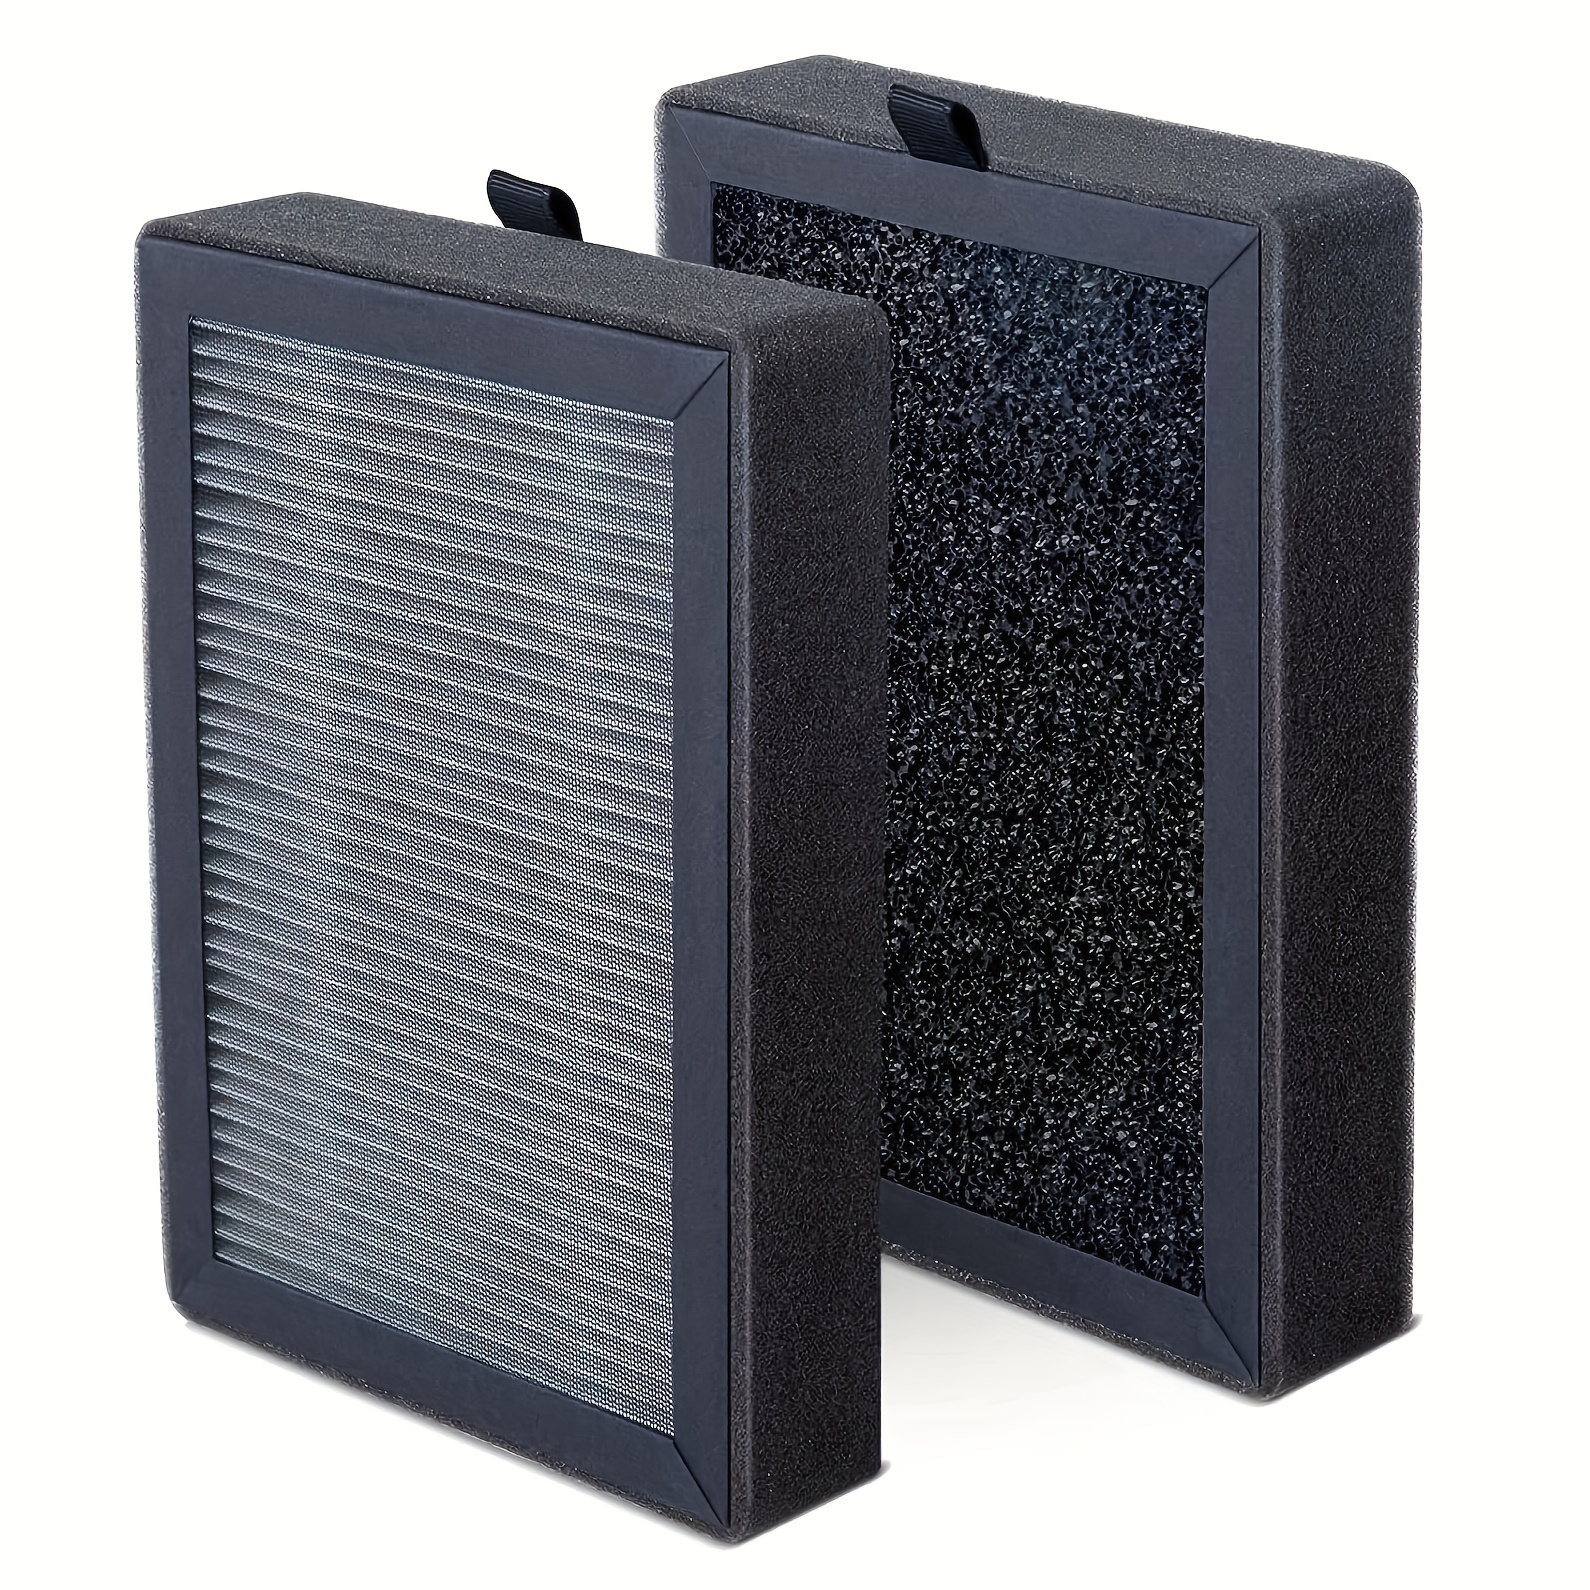  LEVOIT LV-H132 Air Purifier Replacement Filter, 3-in-1